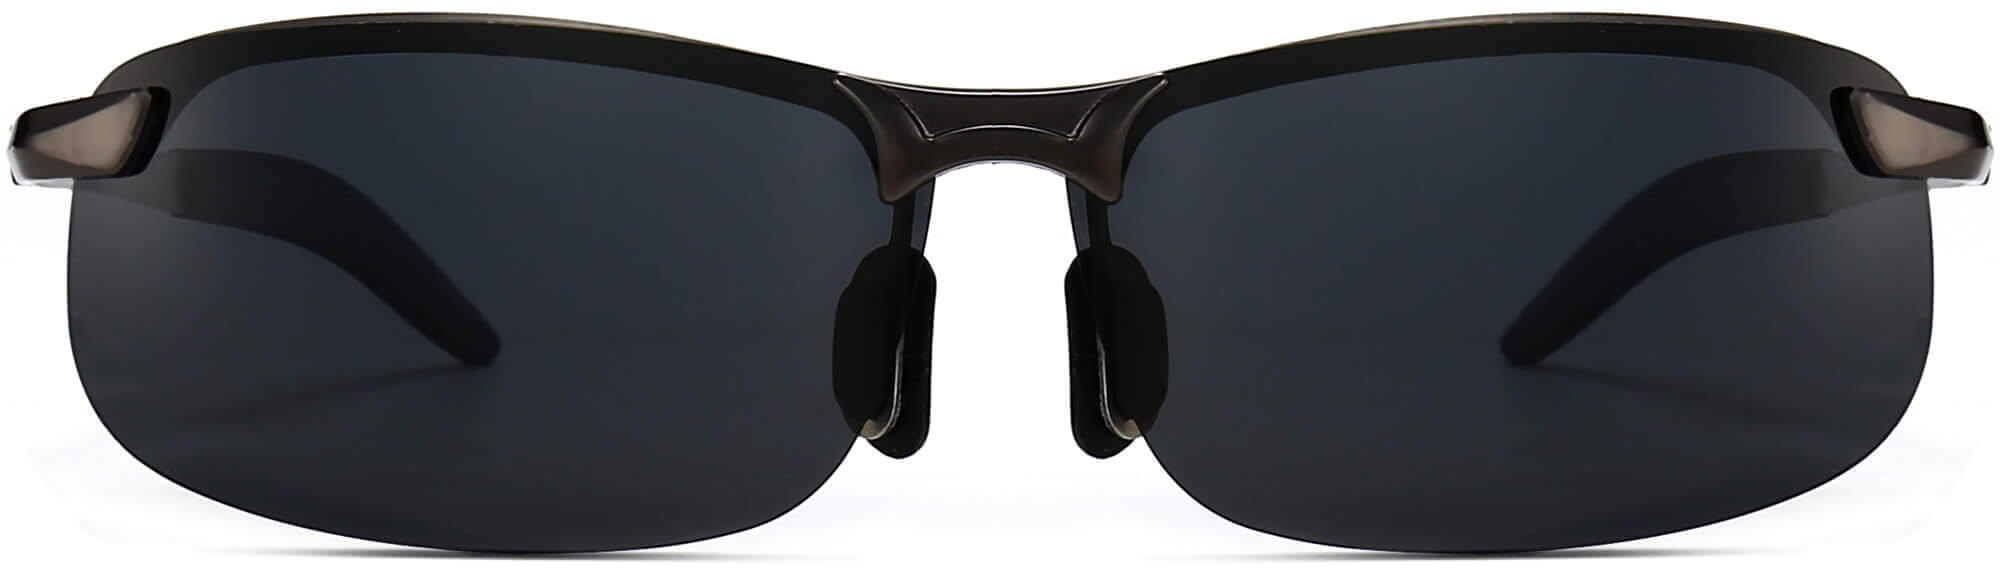 Zoey Black Stainless steel Sunglasses from ANRRI, front view